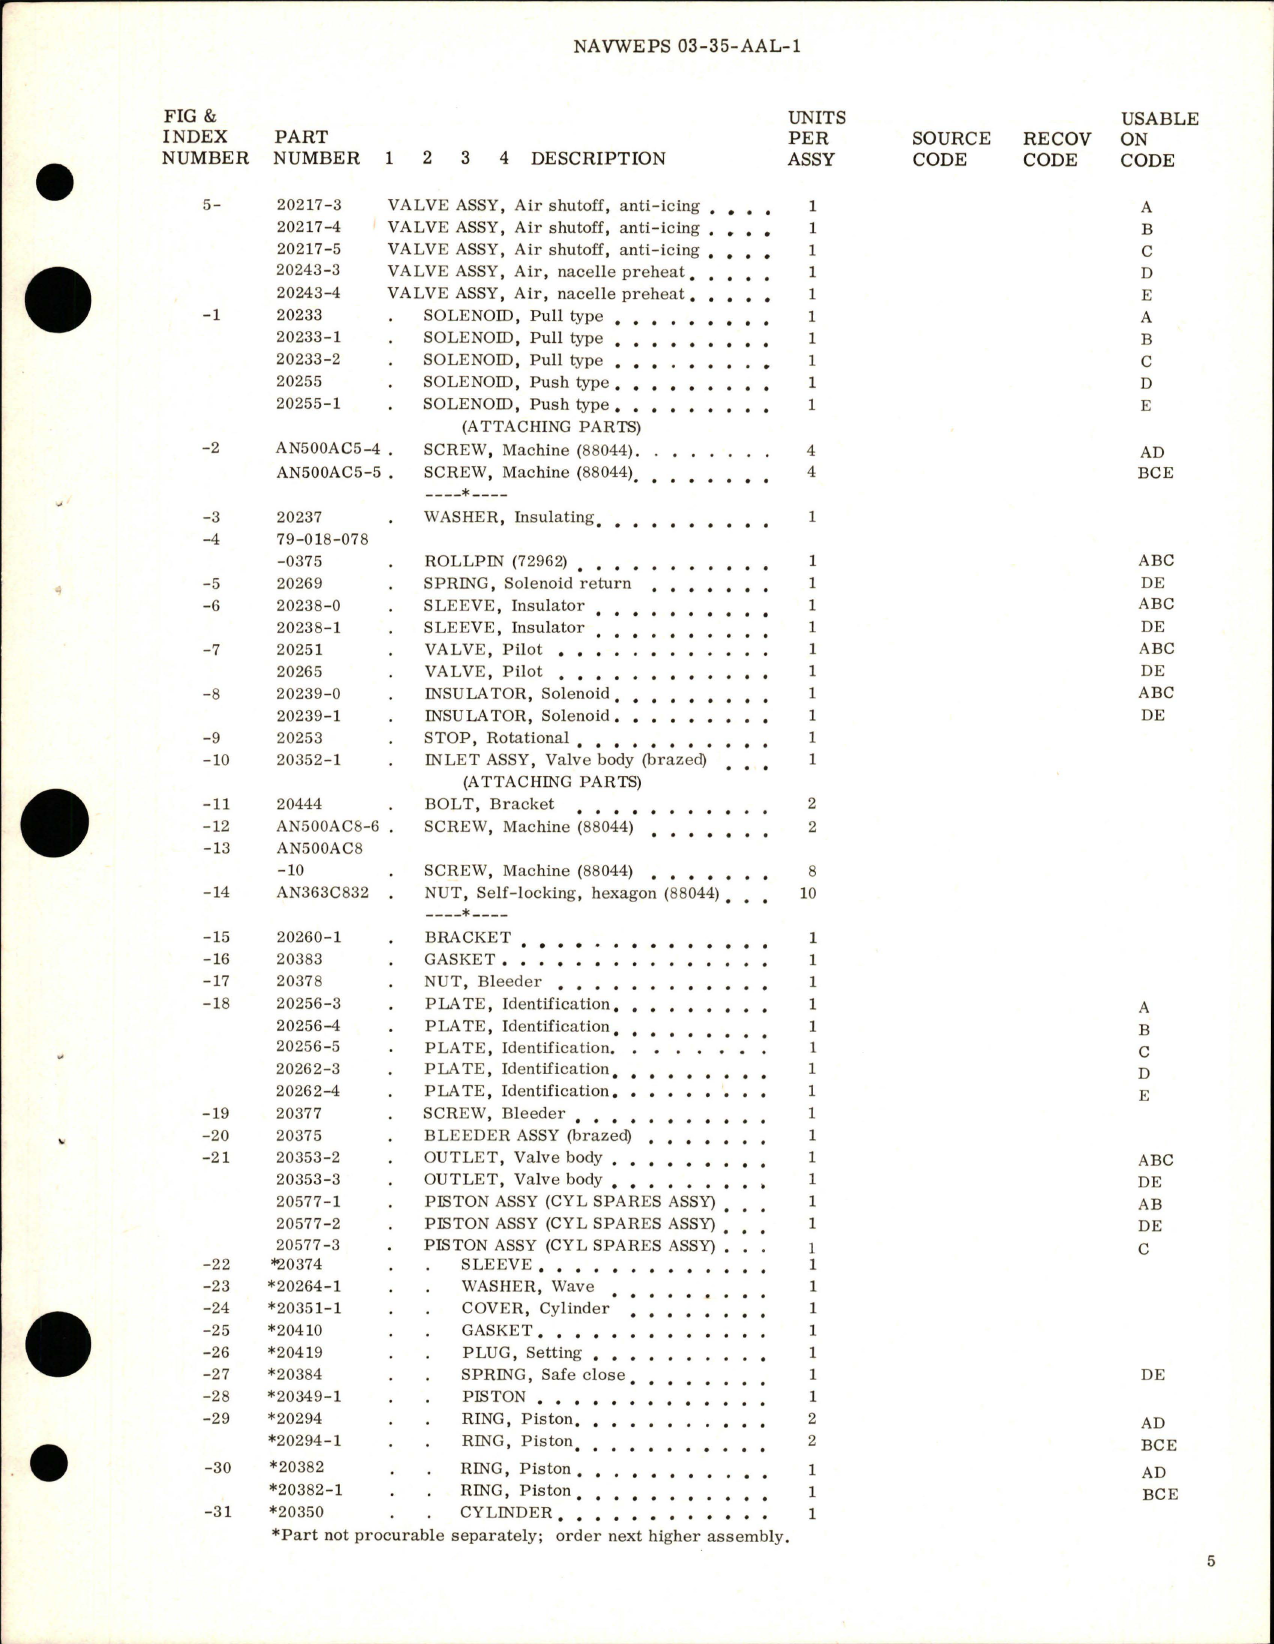 Sample page 5 from AirCorps Library document: Overhaul Instructions with Parts Breakdown for Anti-Icing Air Shutoff Valves and Nacelle Preheat Air Valves